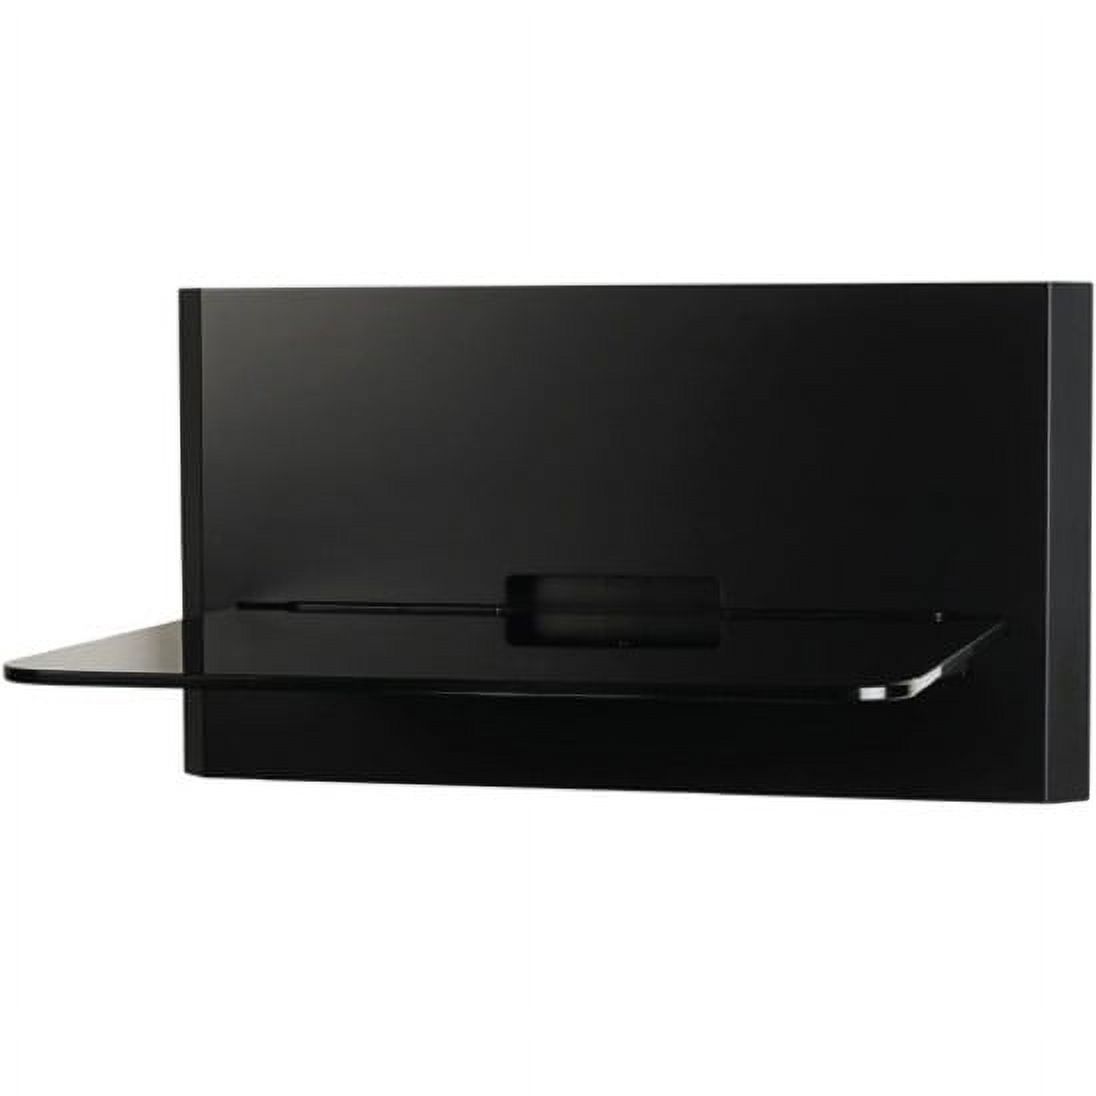 OmniMount Blade Blade1 Mounting Shelf for DVD Player, Gaming Console, Cable Box, Satin Black, Black - image 1 of 2